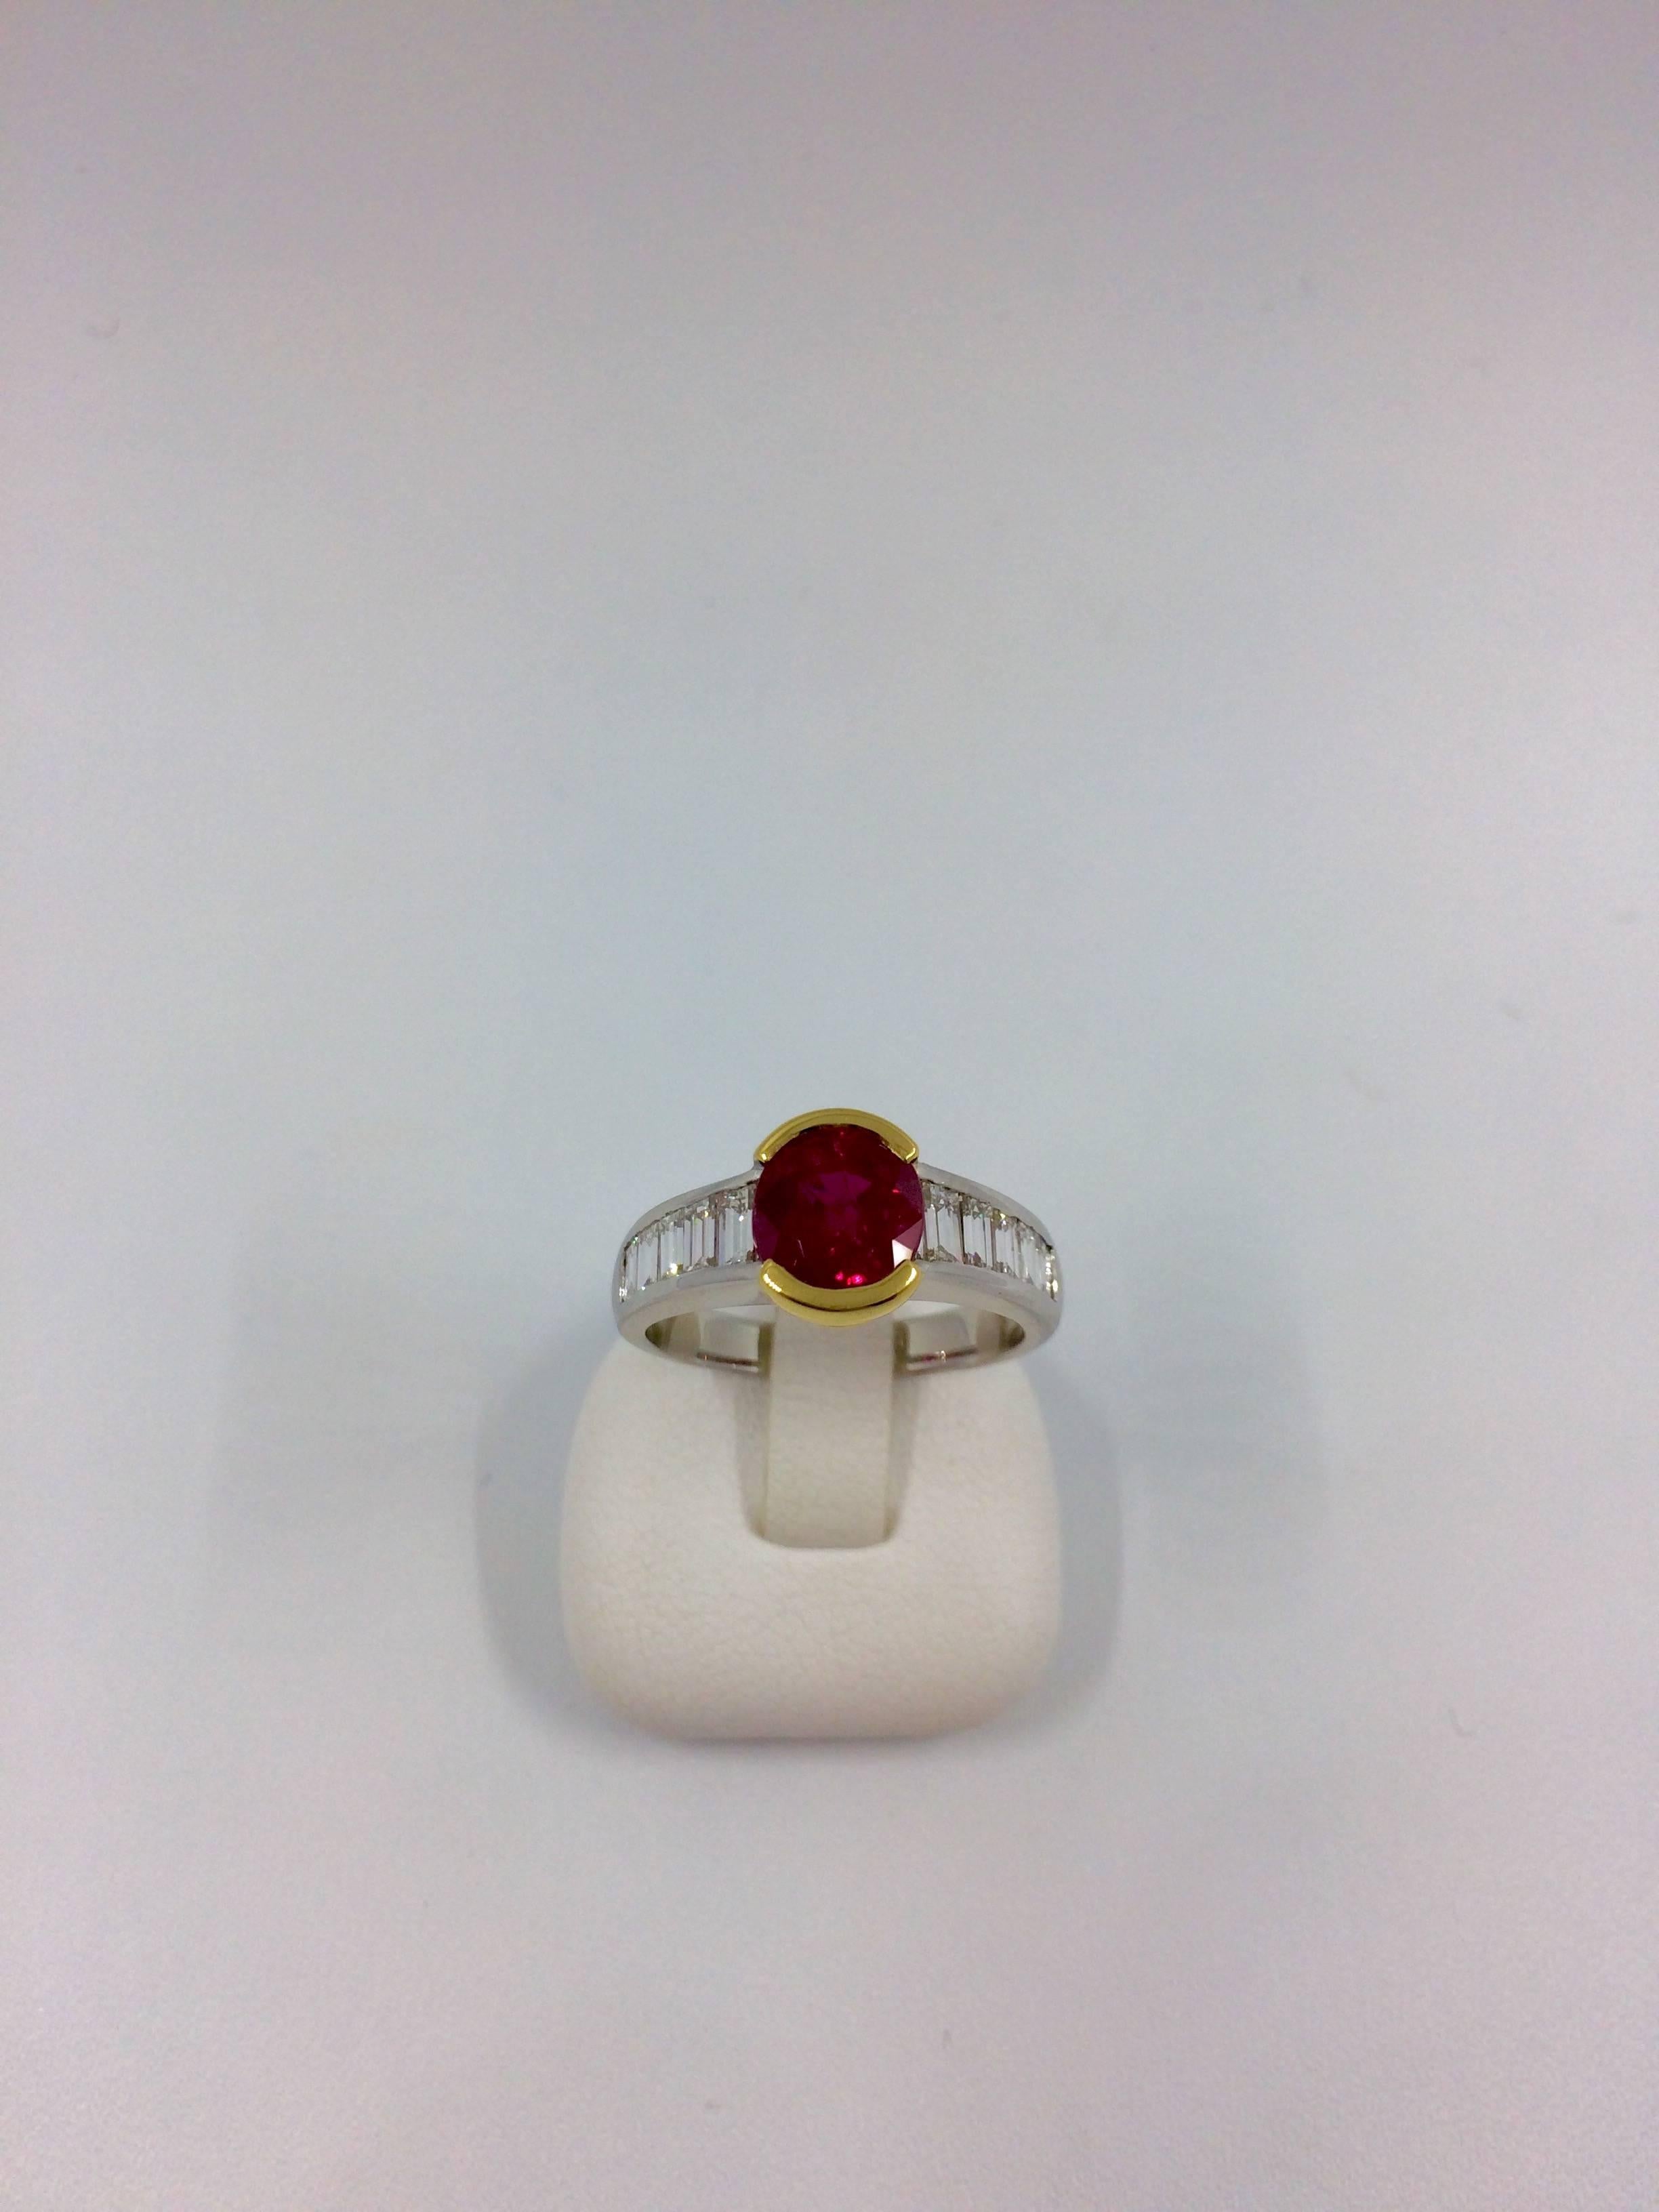 A white and yellow gold ring set in the middle with a stunning burma ruby surrounded by 5 baguette cut diamonds on each side.
Diamonds Quality: F/VS
Diamonds Total Weight: 0,96 carat
Ruby Weight: 2,42 carat
Net Weight: 5,10 grams
Finger size: 7